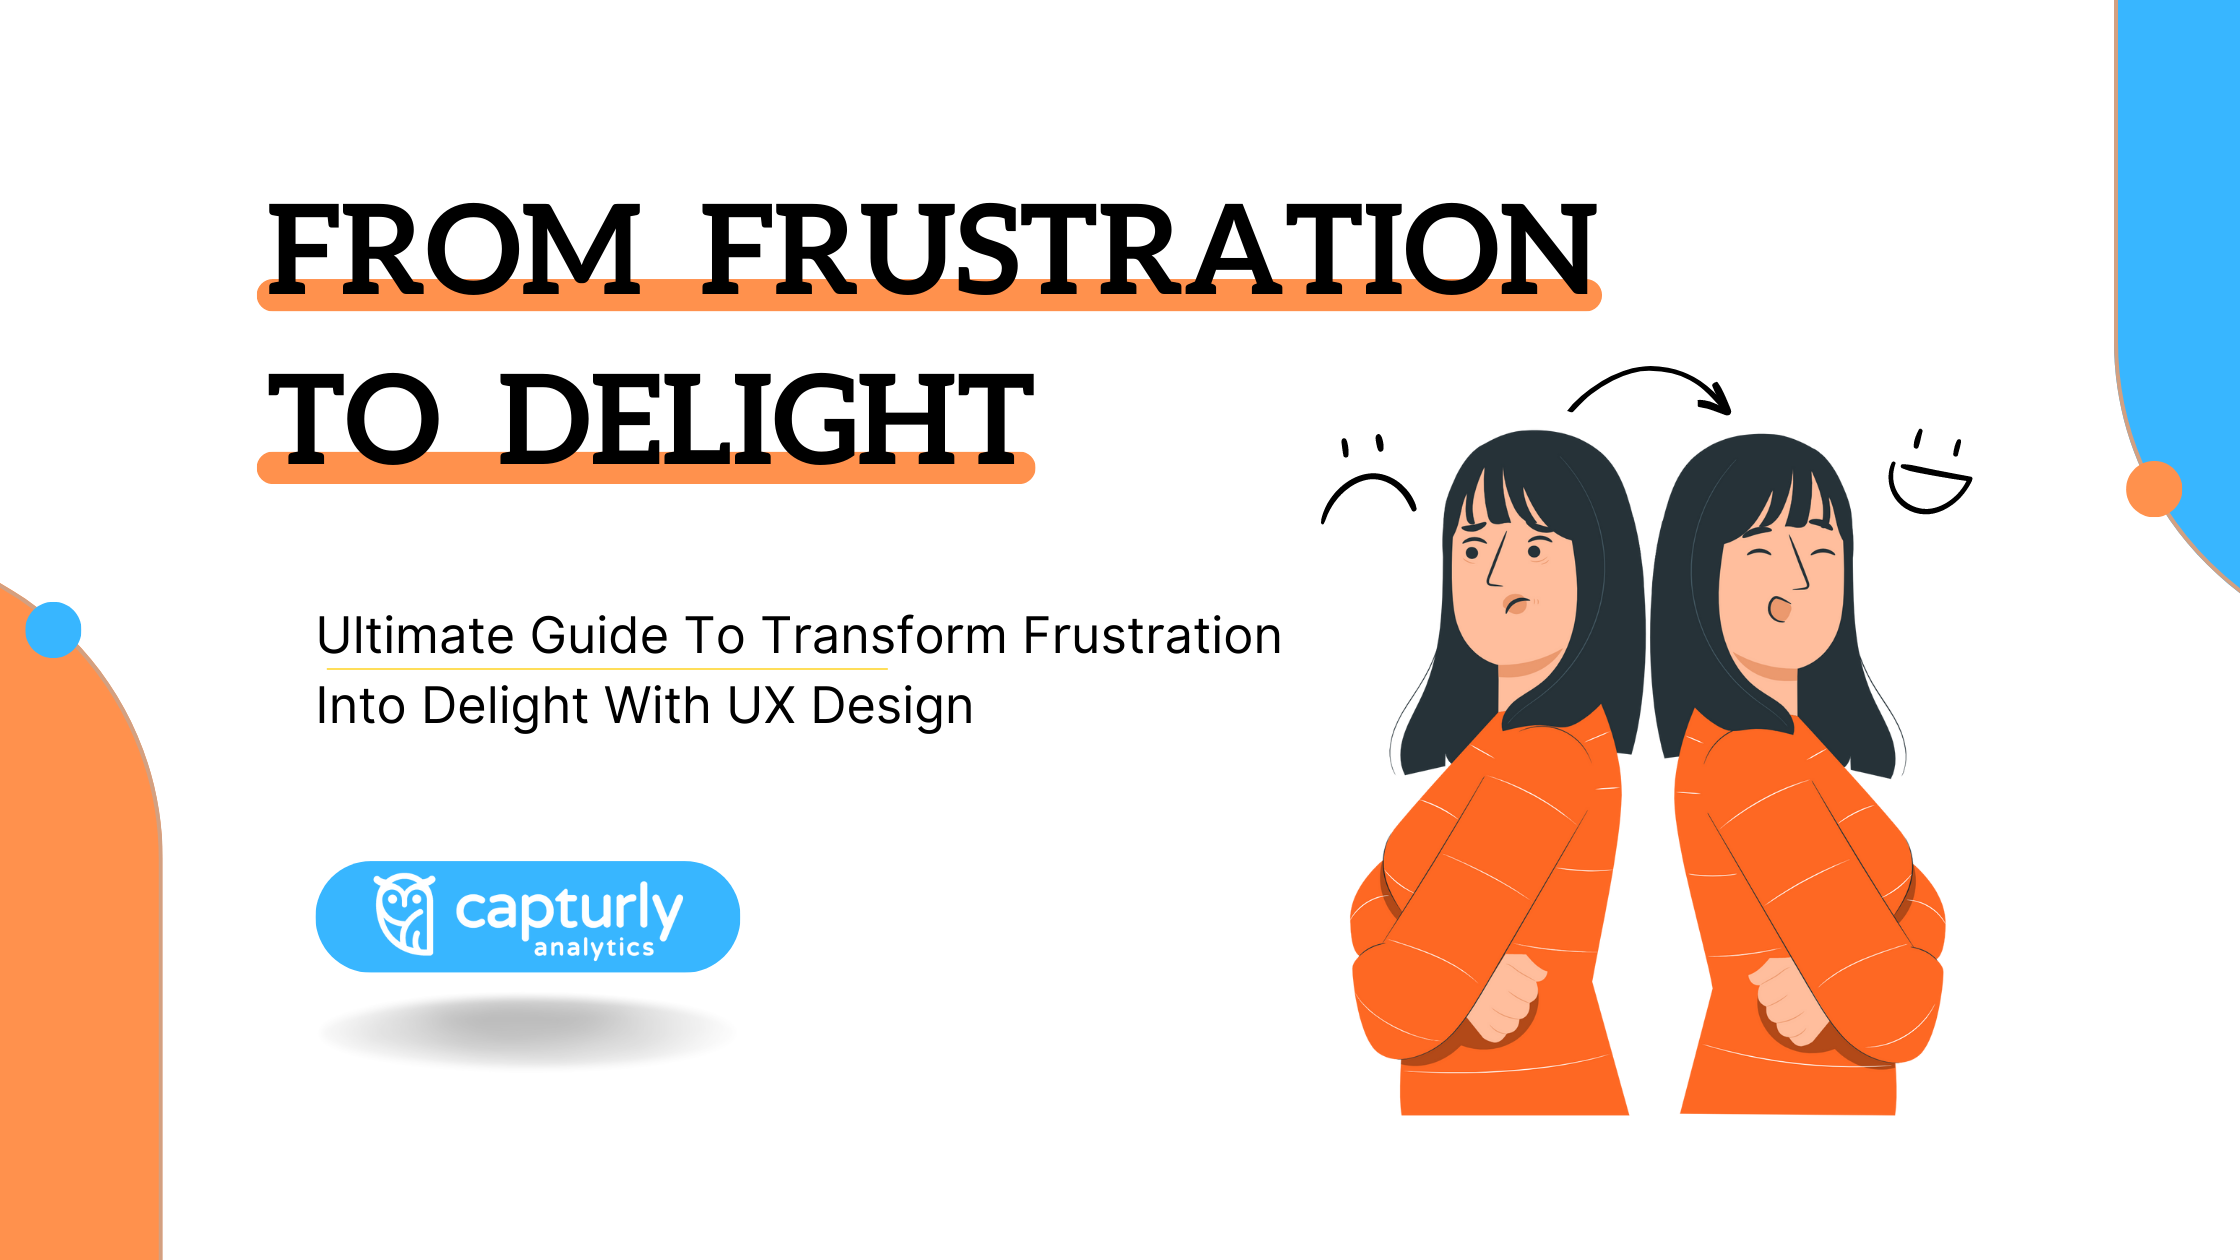 From Frustration to Delight Transforming User Experiences through UX Design